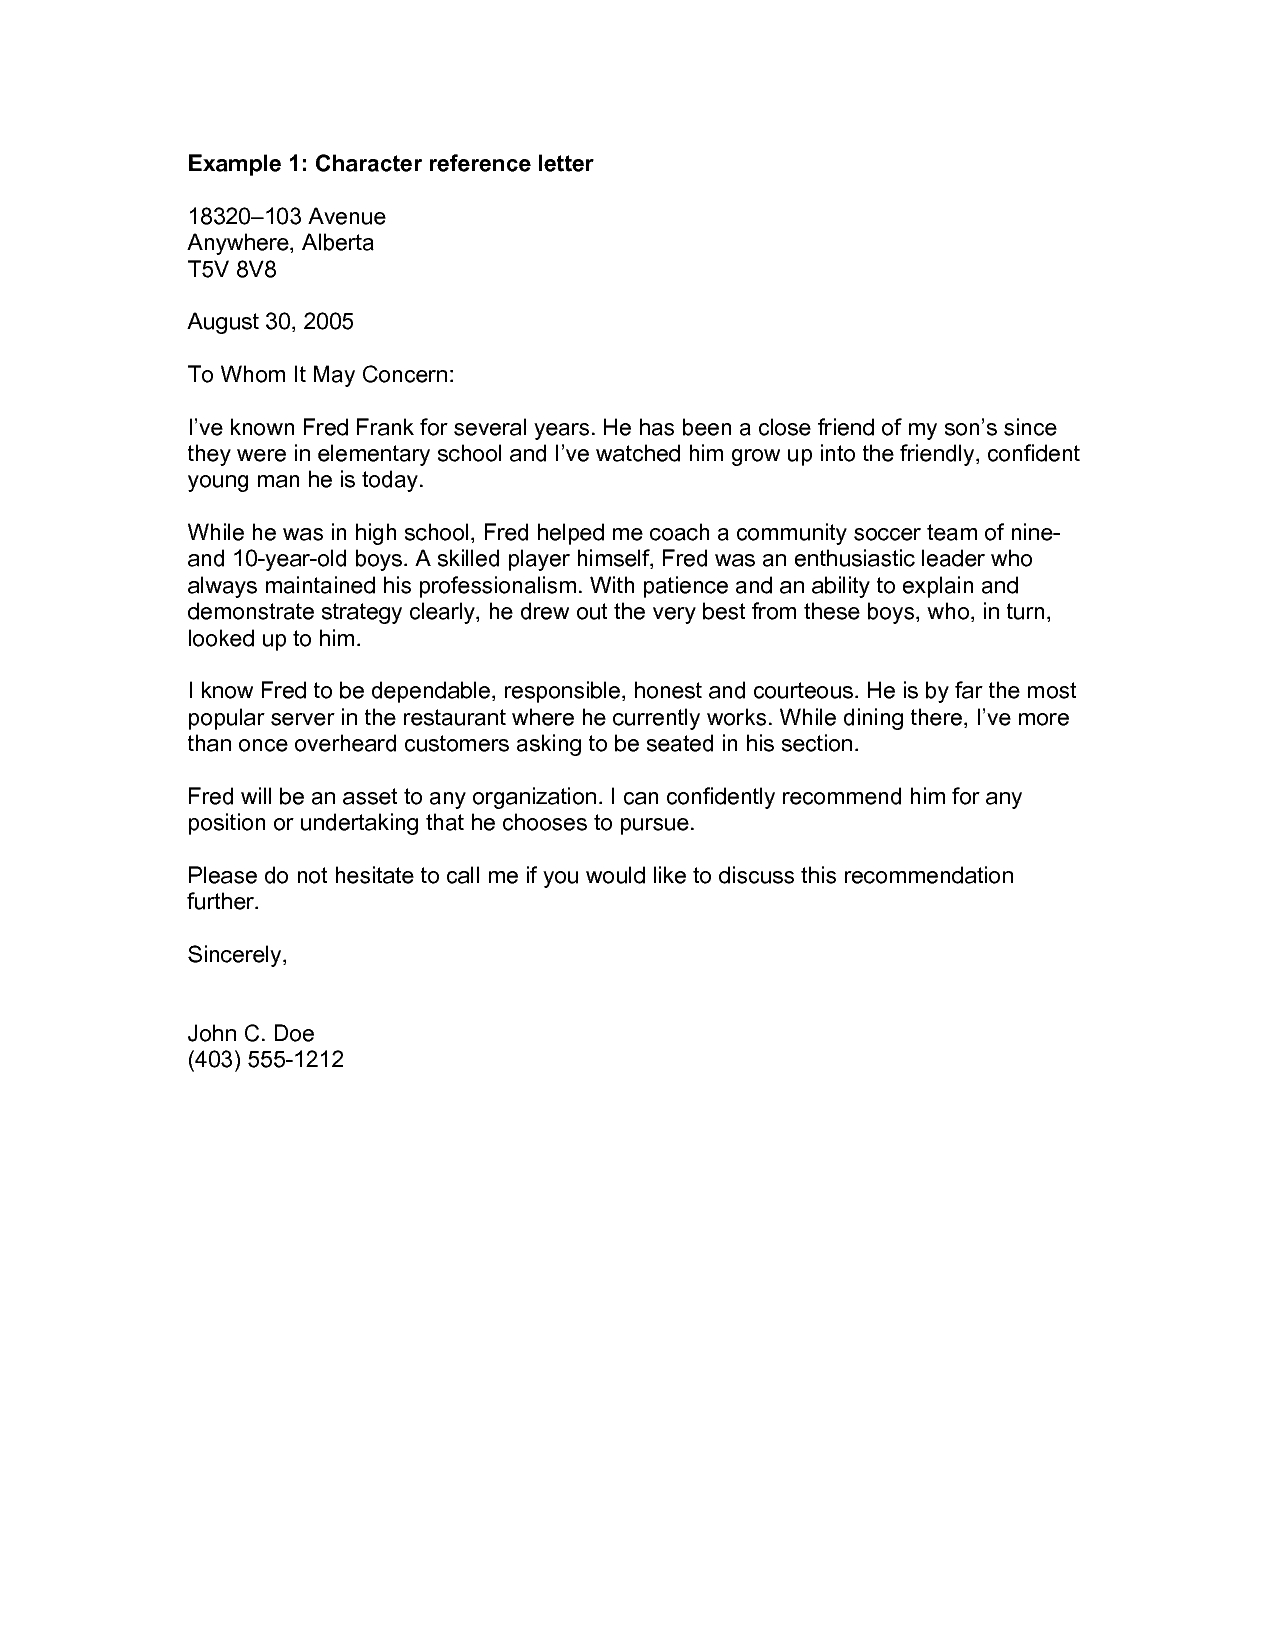 Scholarship Letter Of Recommendation Template - Re Mendation Letter for A Friend Template Opengovpartnersorgletter